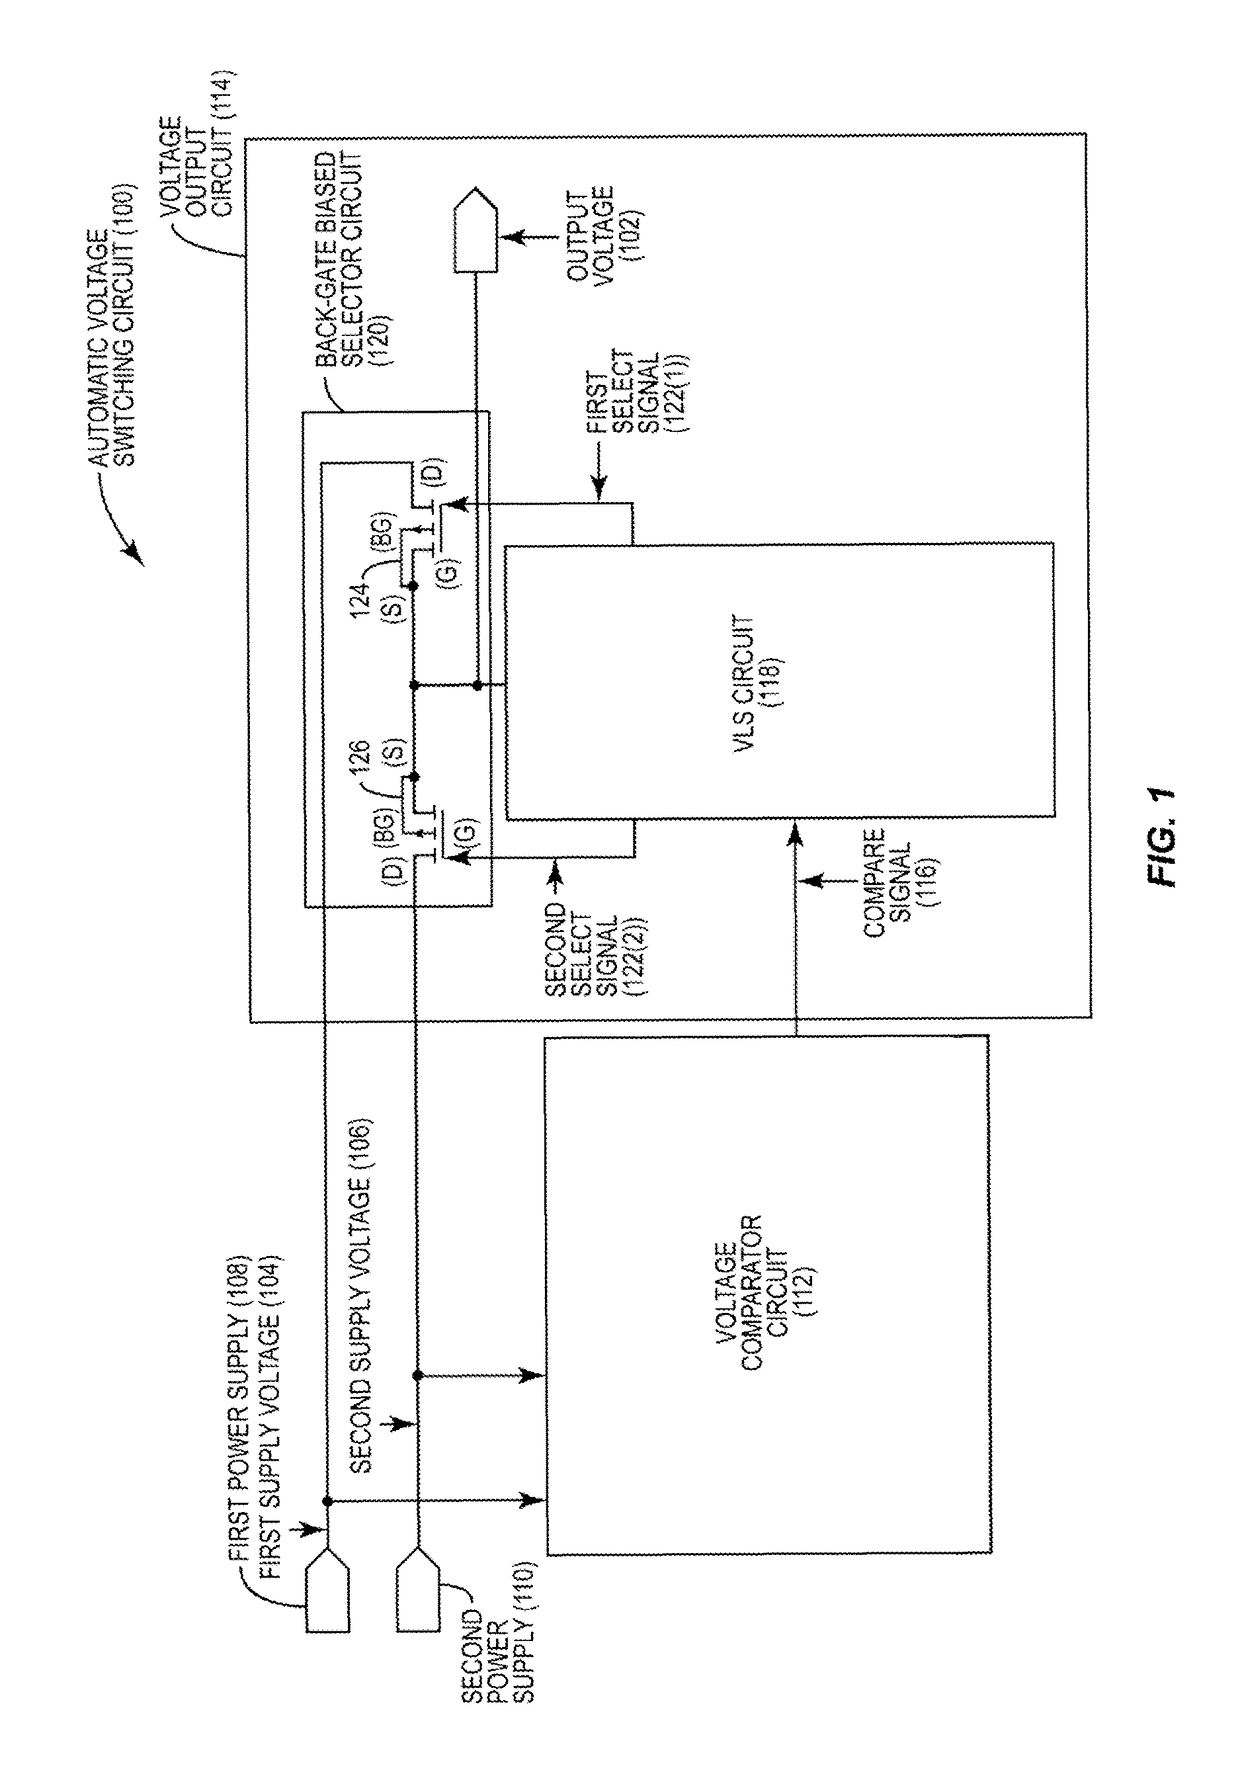 Automatic voltage switching circuit for selecting a higher voltage of multiple supply voltages to provide as an output voltage